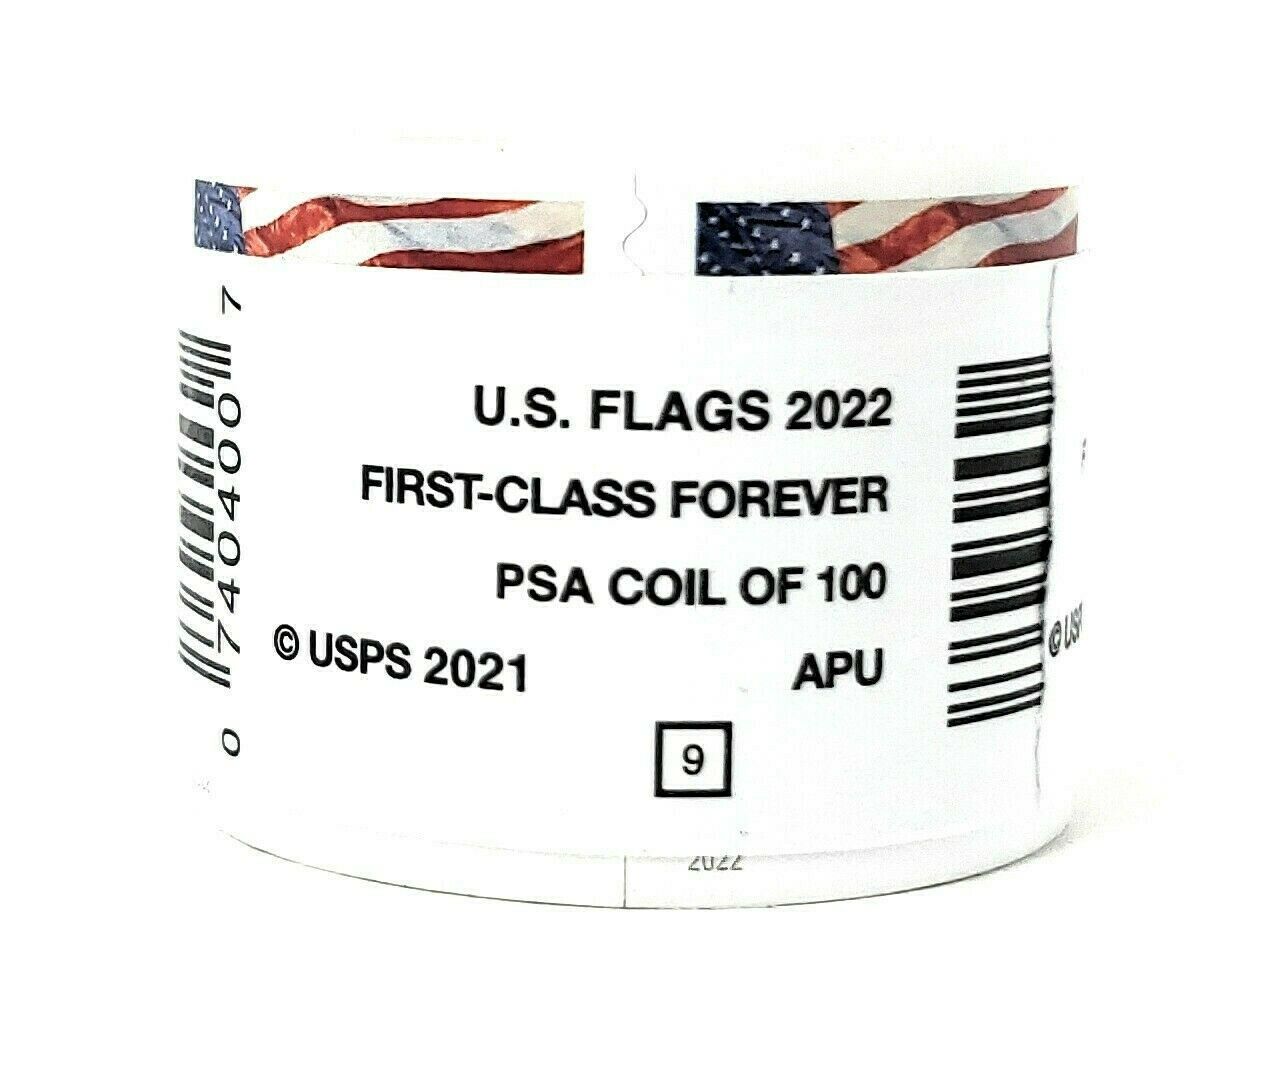 USPS ROLL OF 100 Forever Stamps - Buy Now